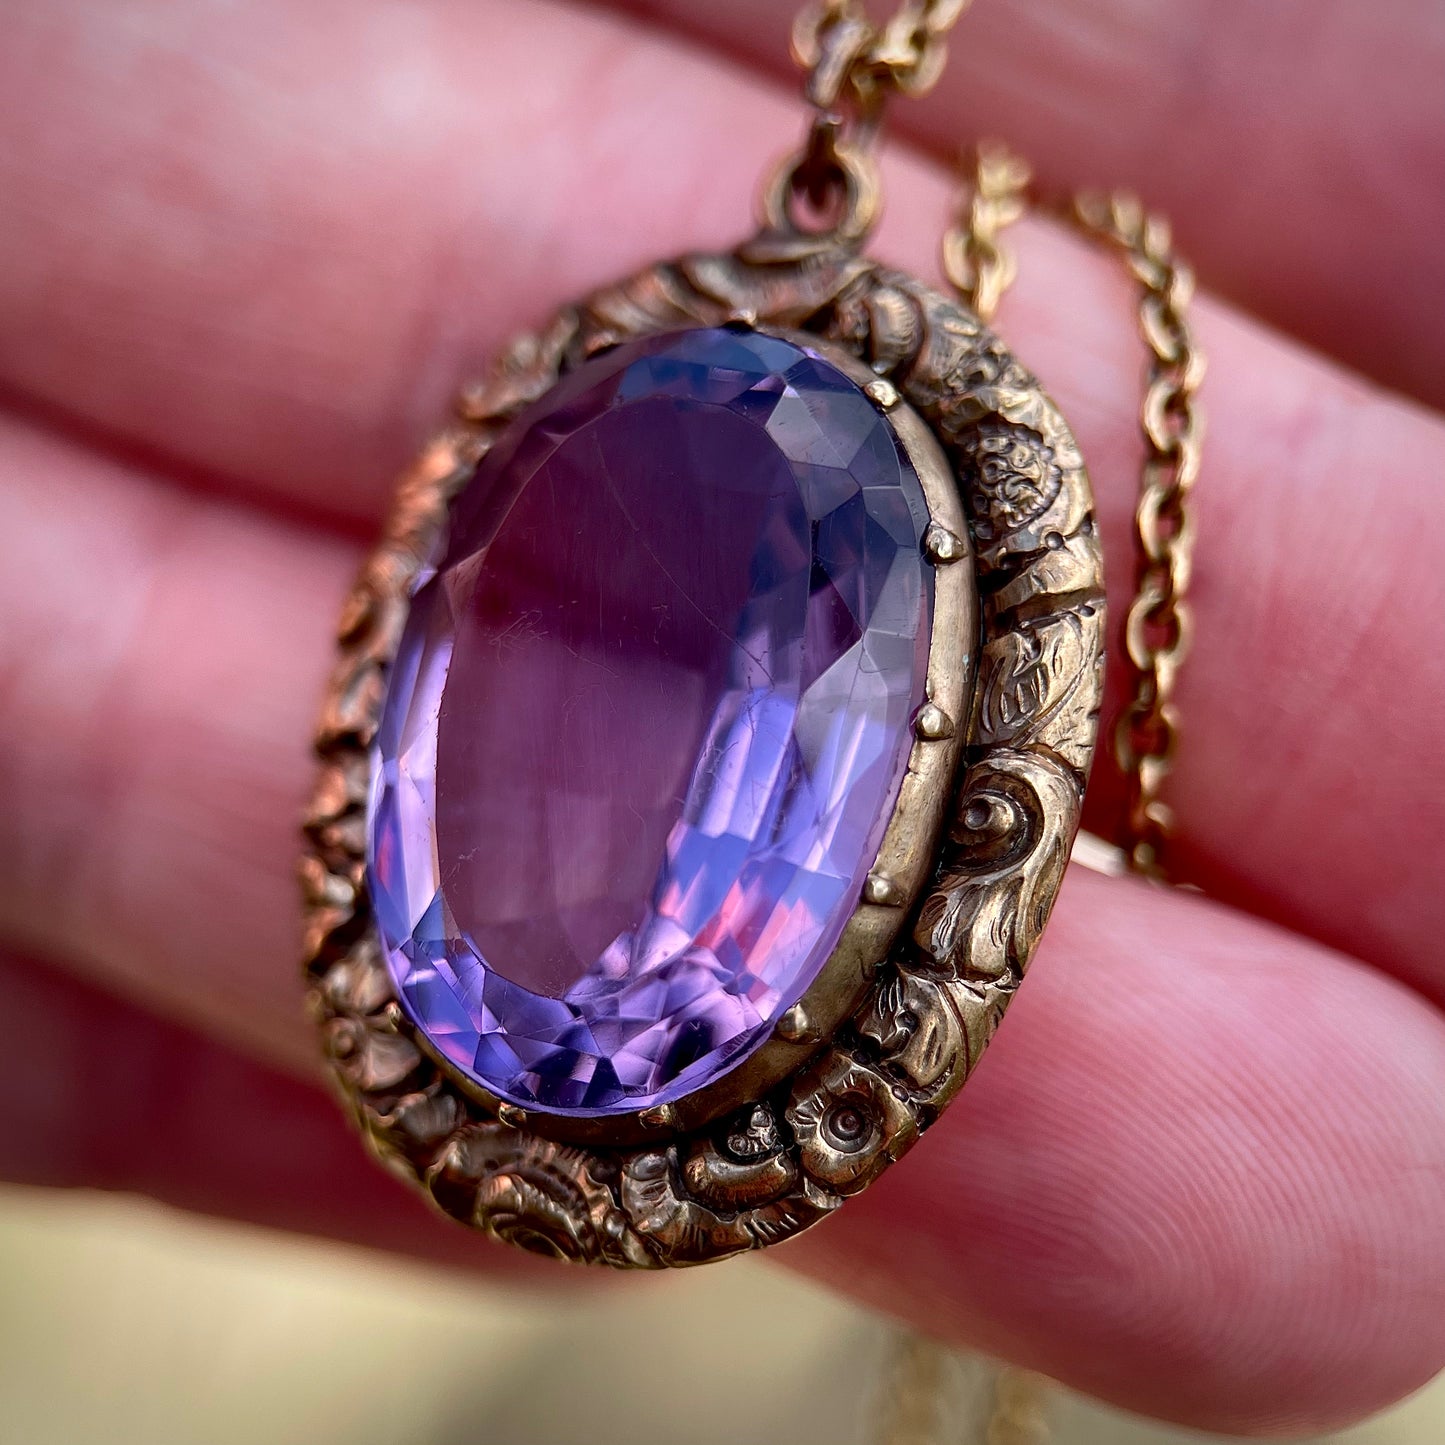 Antique Georgian / Early Victorian Chased Gold Amethyst Pendant 9CT Gold Chain